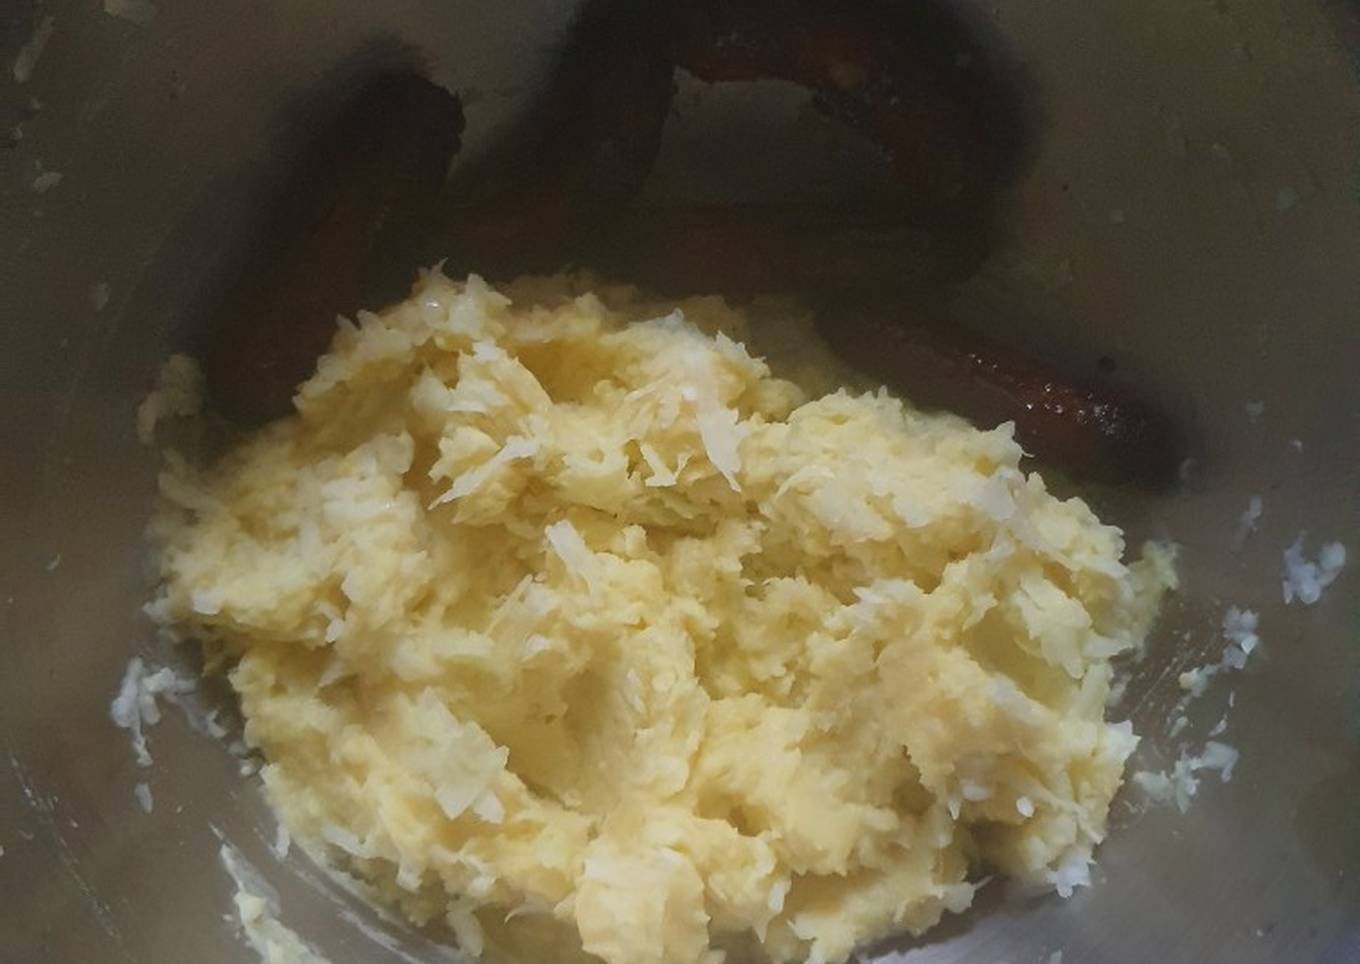 shredded cabbage in mashed potatoes